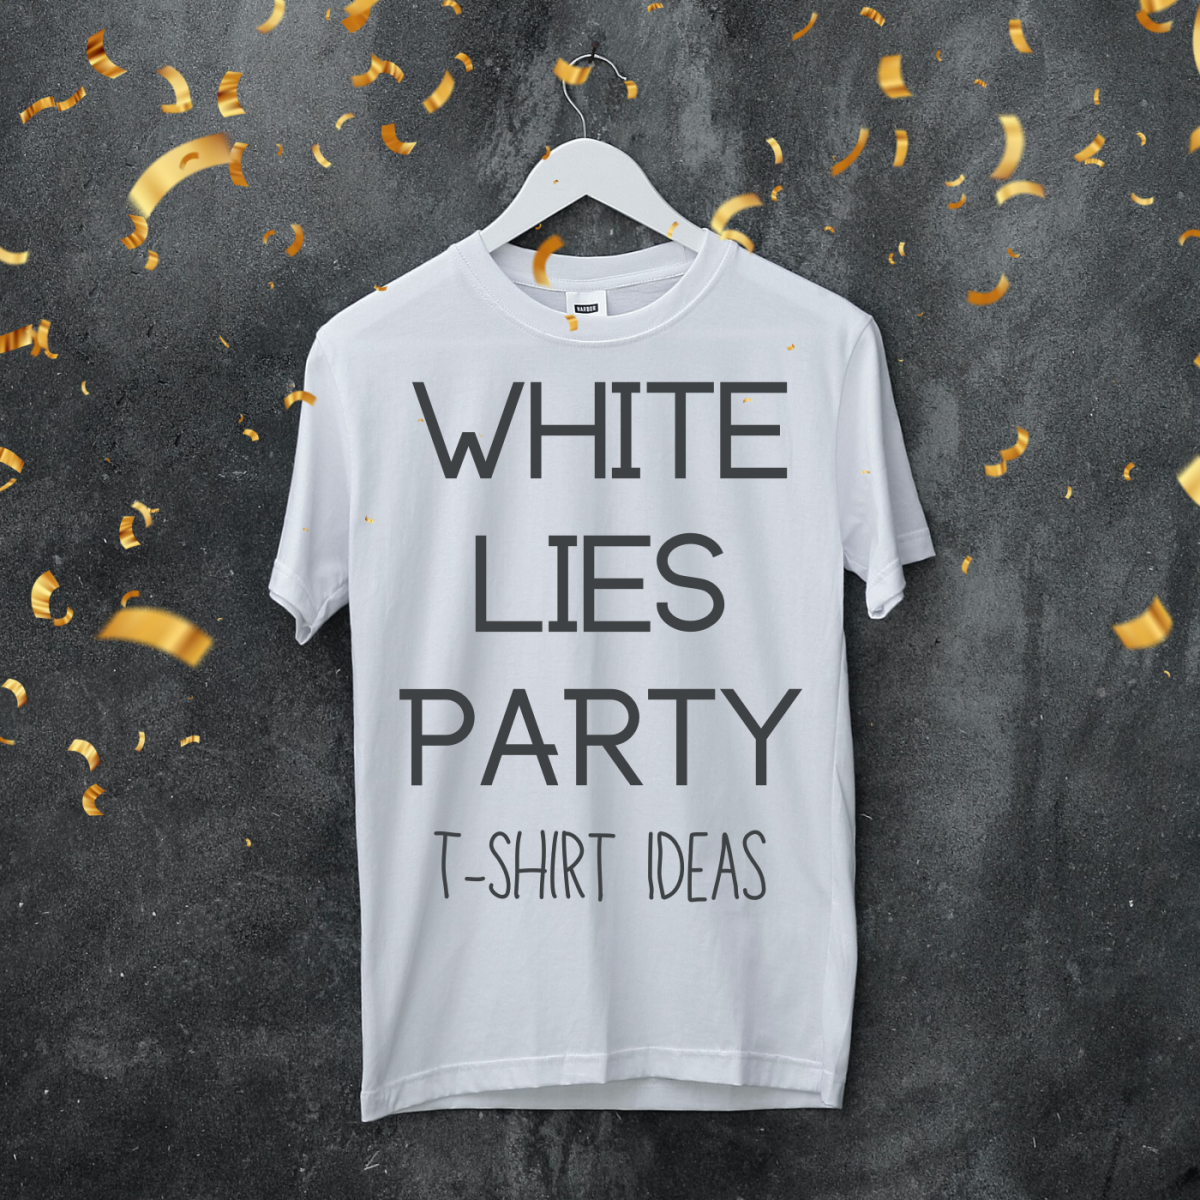 Need a clever lie to write on your shirt for a "white lies" party? We've got you covered!